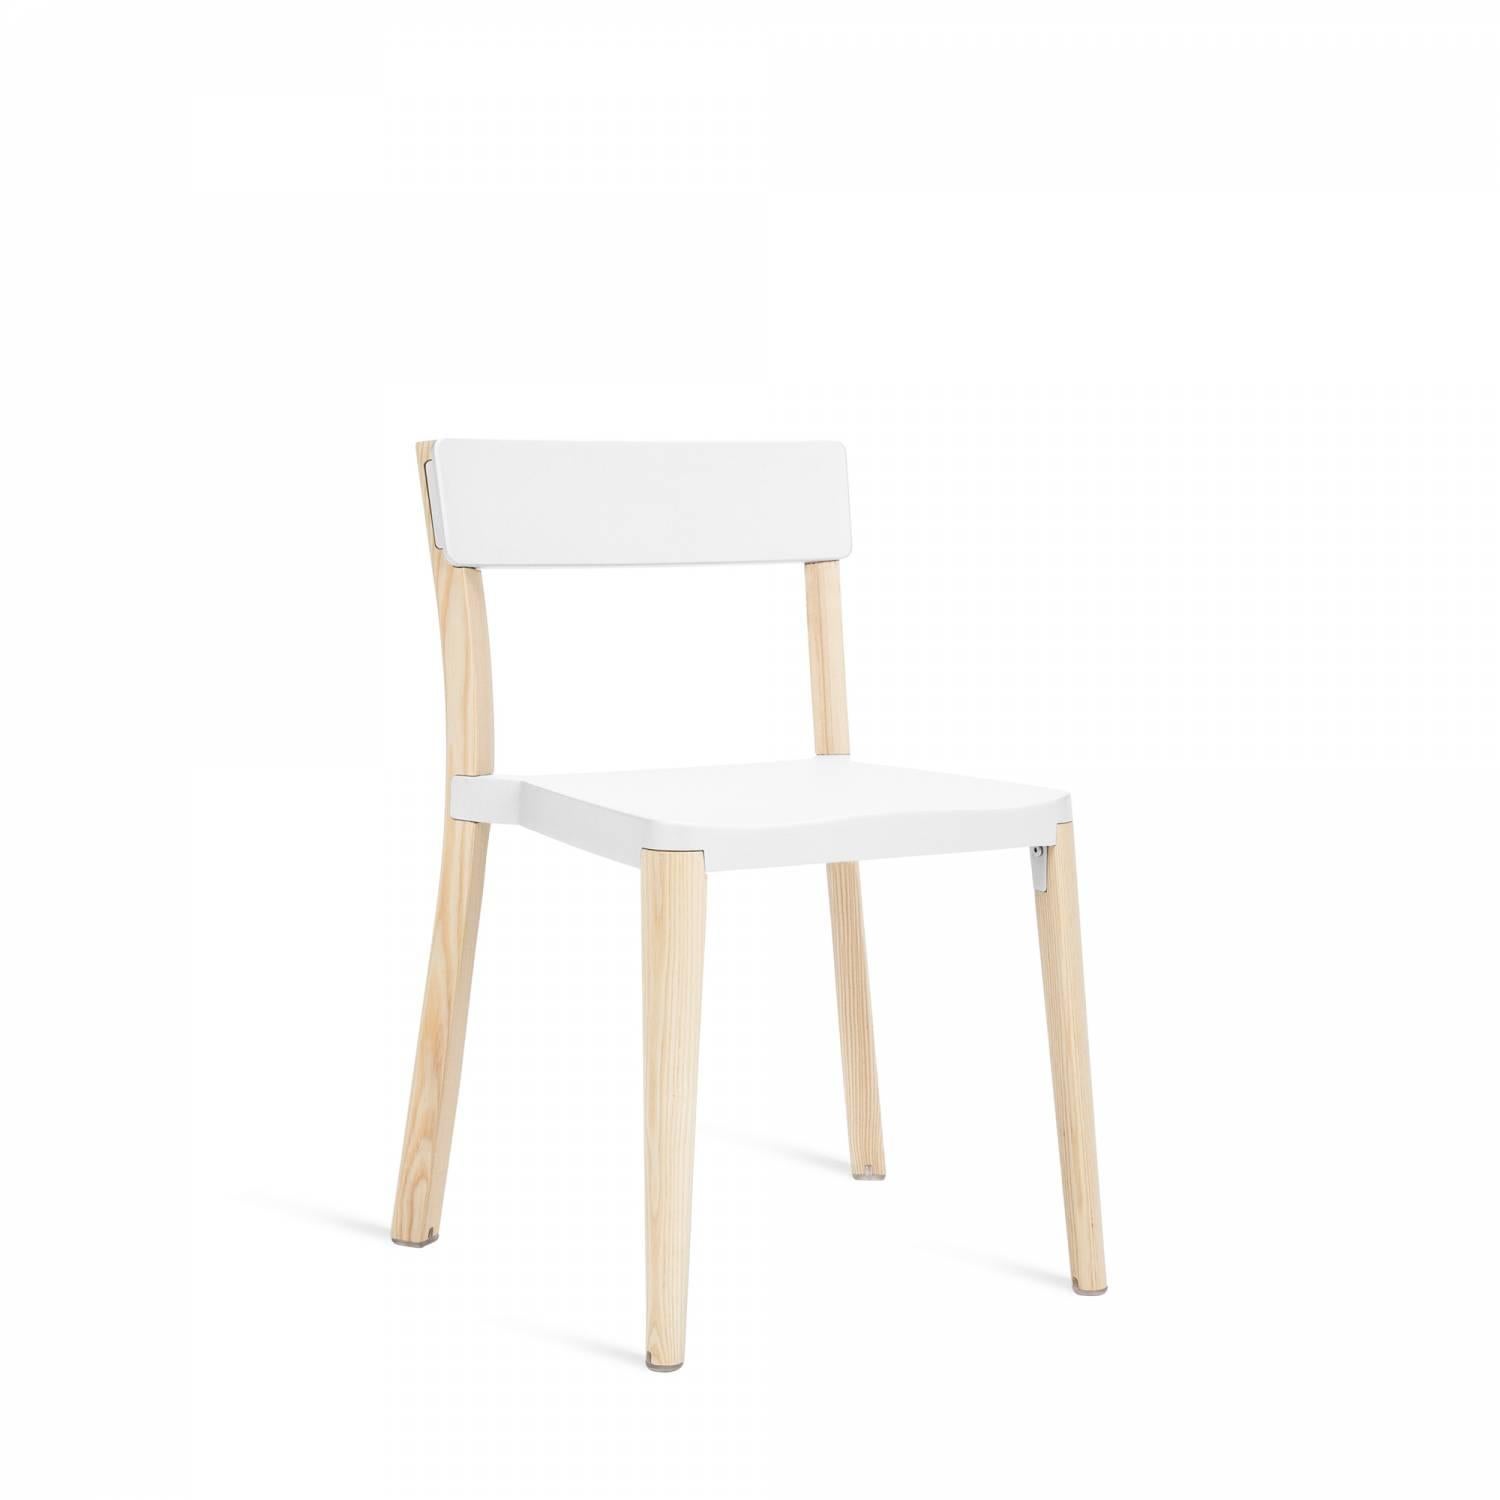 Our clients have asked us to utilize wood in our designs for years. Lancaster features a reclaimed, solid ash frame and recycled die-cast aluminum seat and back- an expression of industrial technique and warm materials.

Made of: Recycled